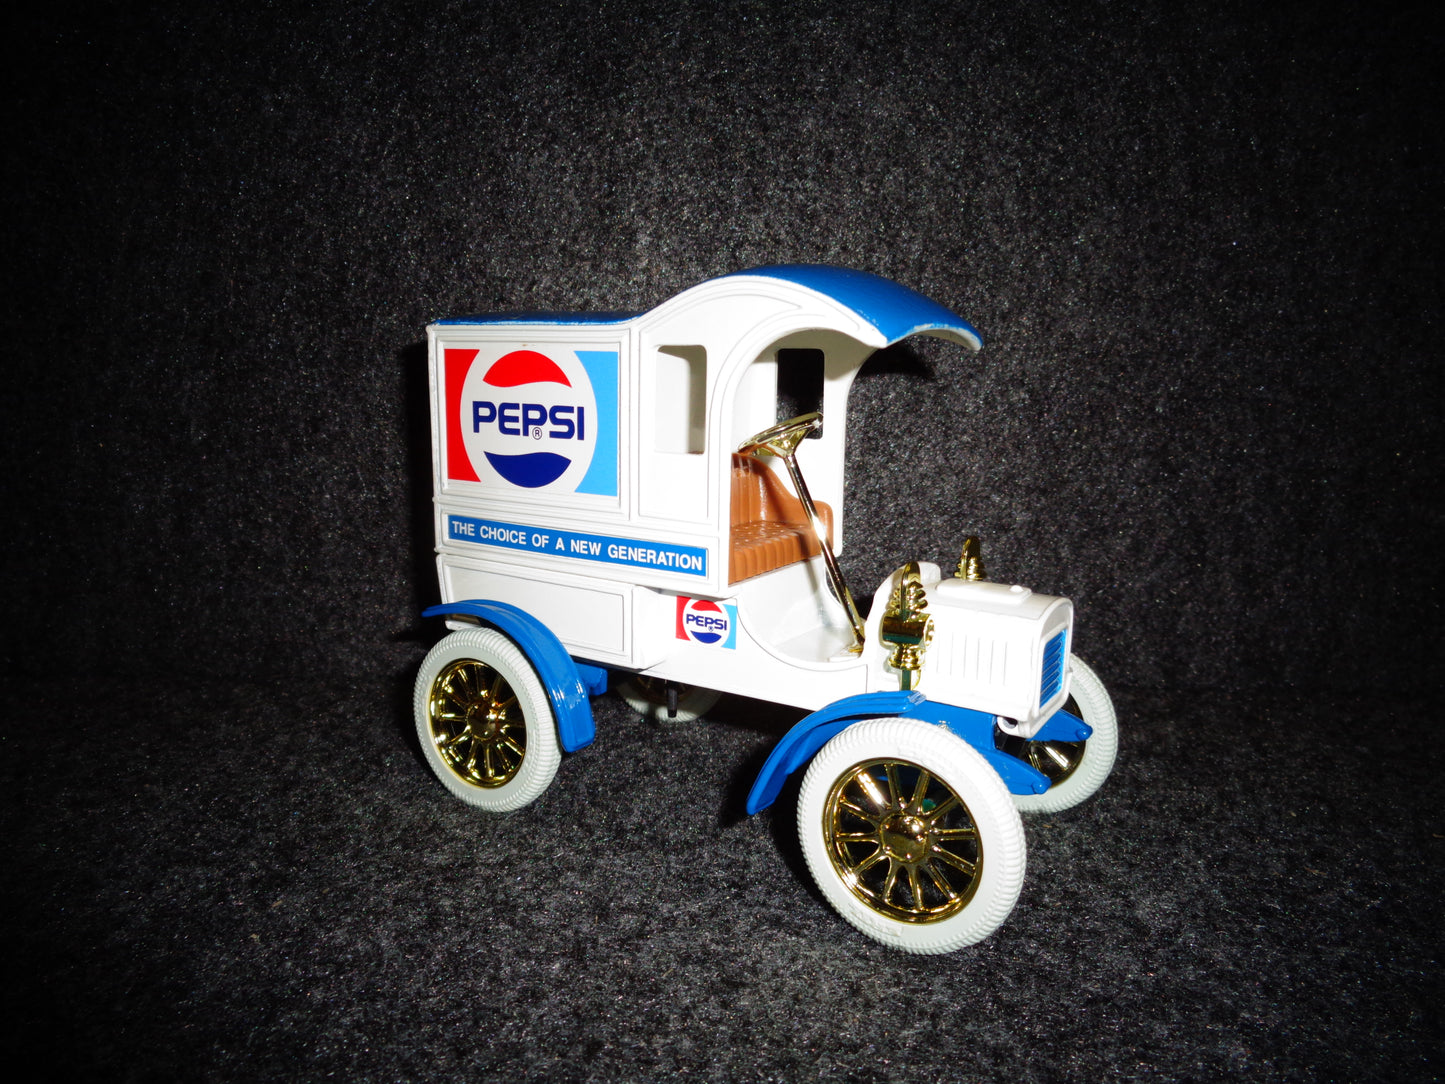 Pepsi 1905 Ford Model T Delivery Car